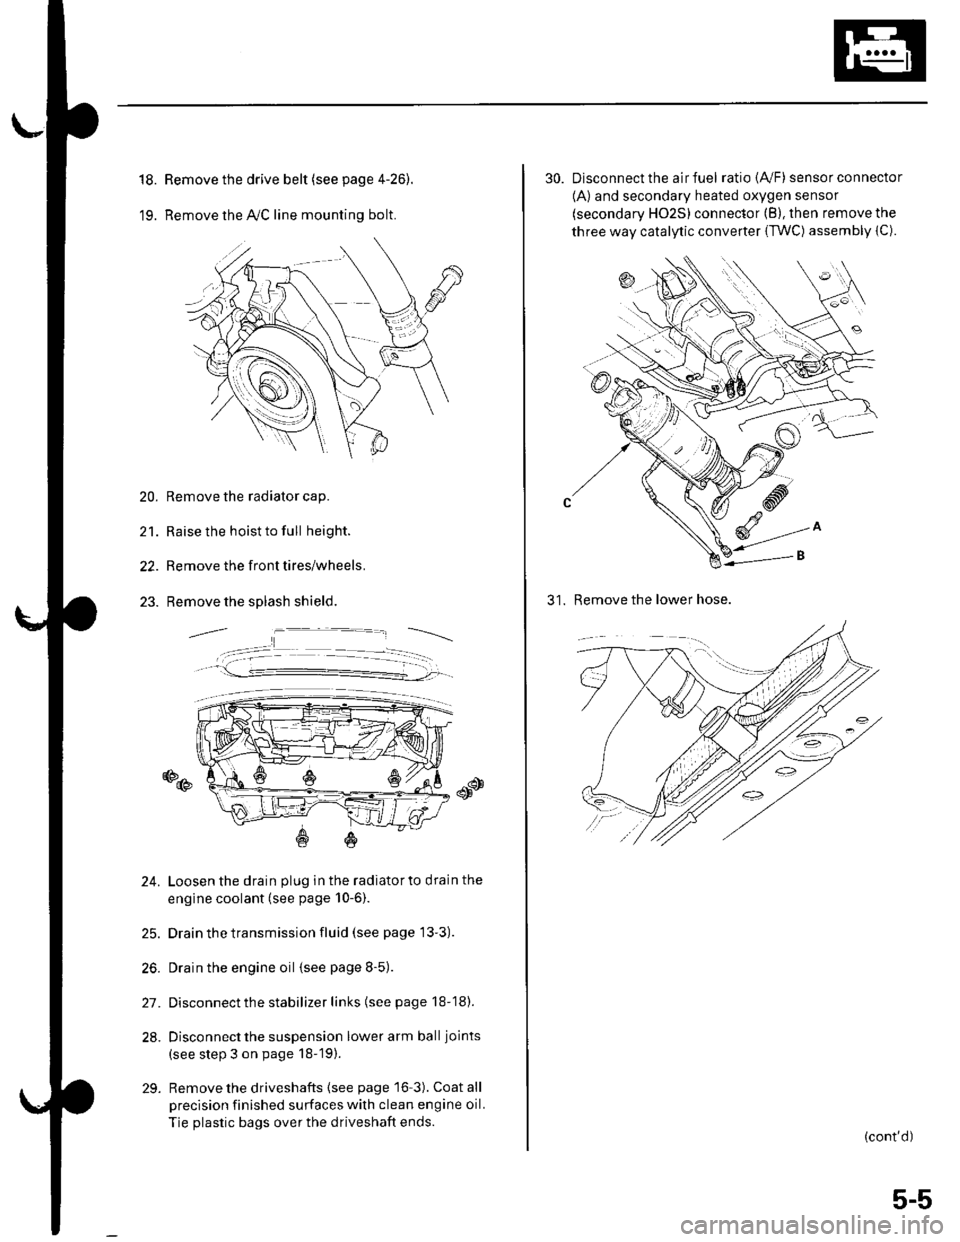 HONDA CIVIC 2002 7.G Workshop Manual 18.
19.
Remove the drive belt (see page 4-26).
Remove the lvC line mounting bolt.
20. Remove the radiator cap.
21. Raise the hoist to full height.
22. Remove the front tires/wheels.
23. Remove the spl